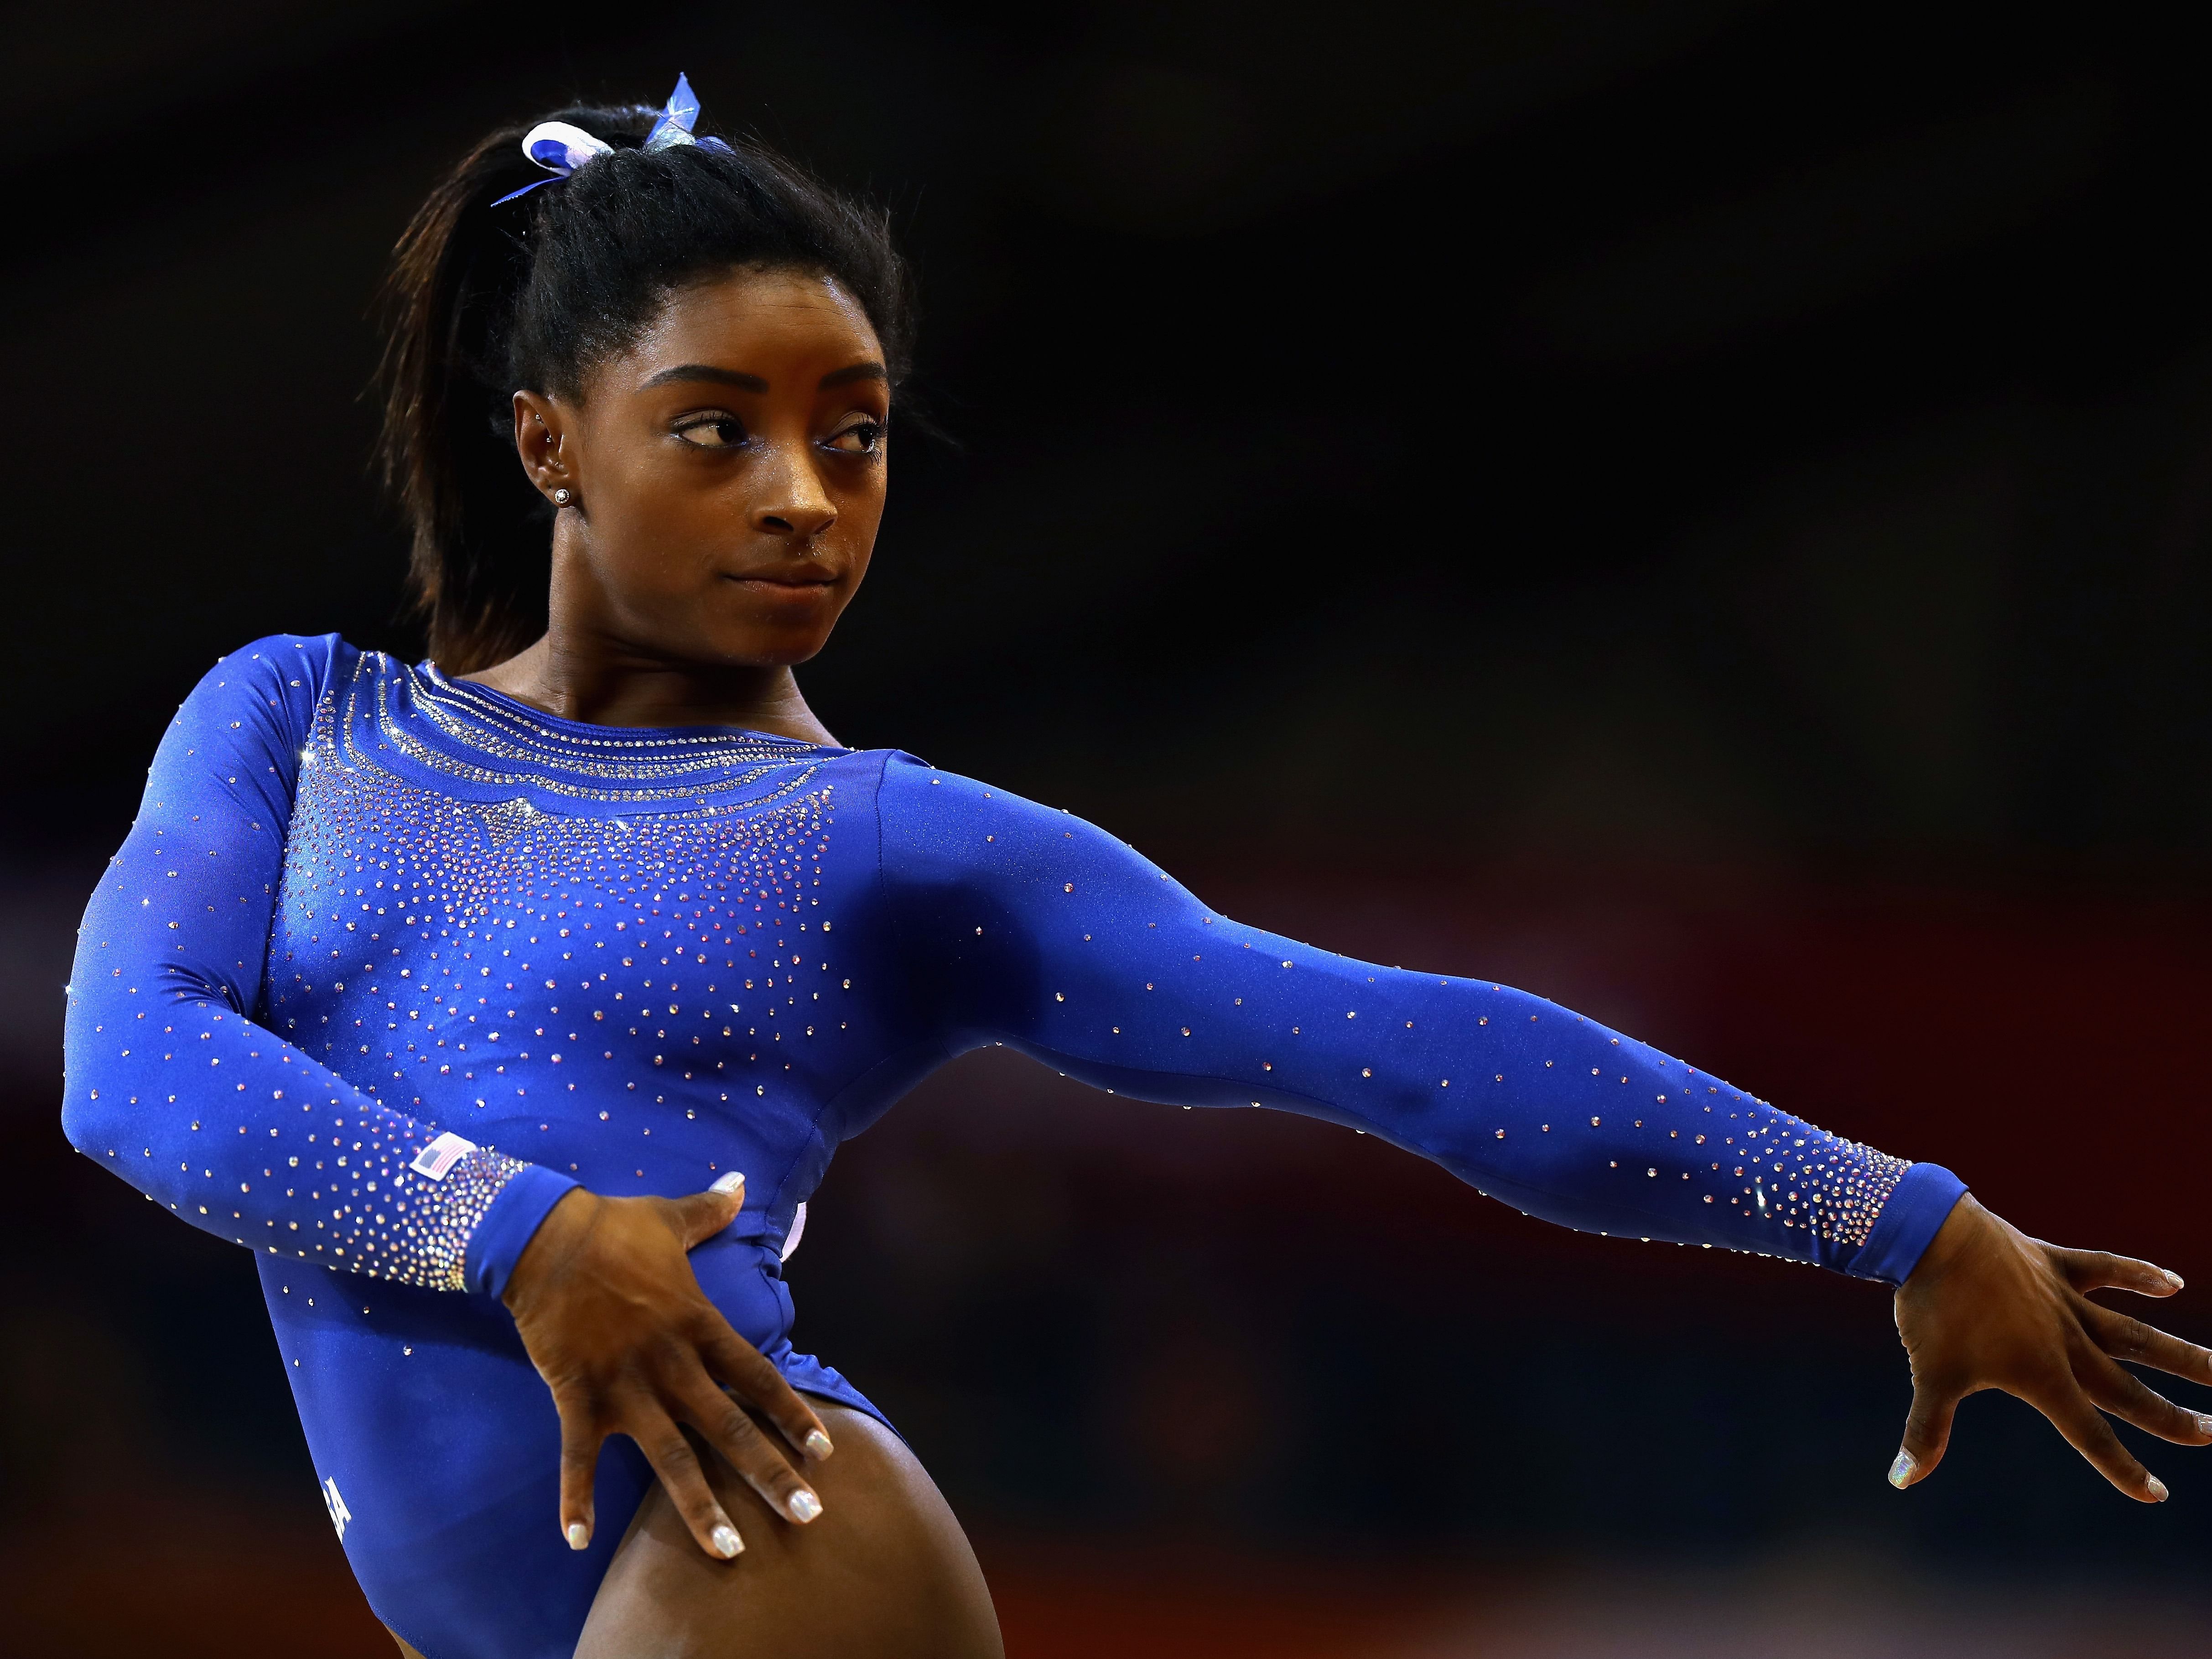 Simone Biles performing her routine (via getty images) 